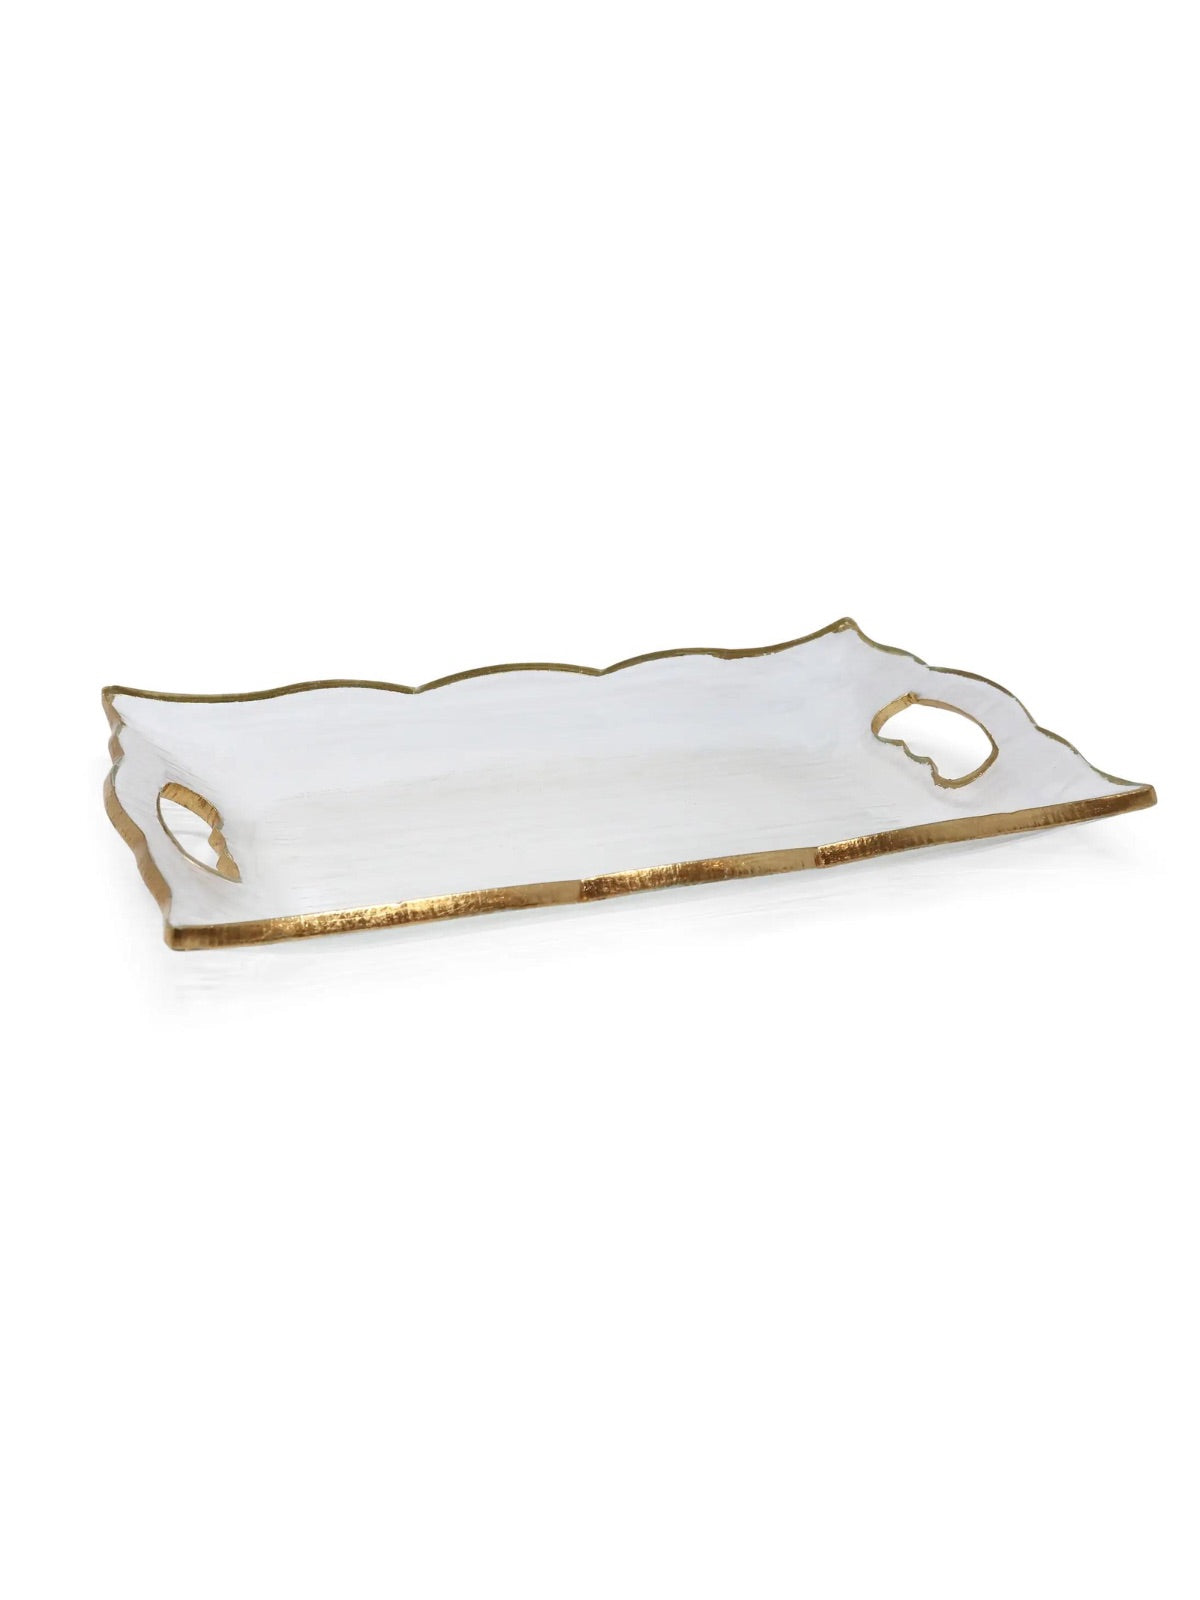 Rectangular Glass Tray with Handles and Metallic Gold Edges.